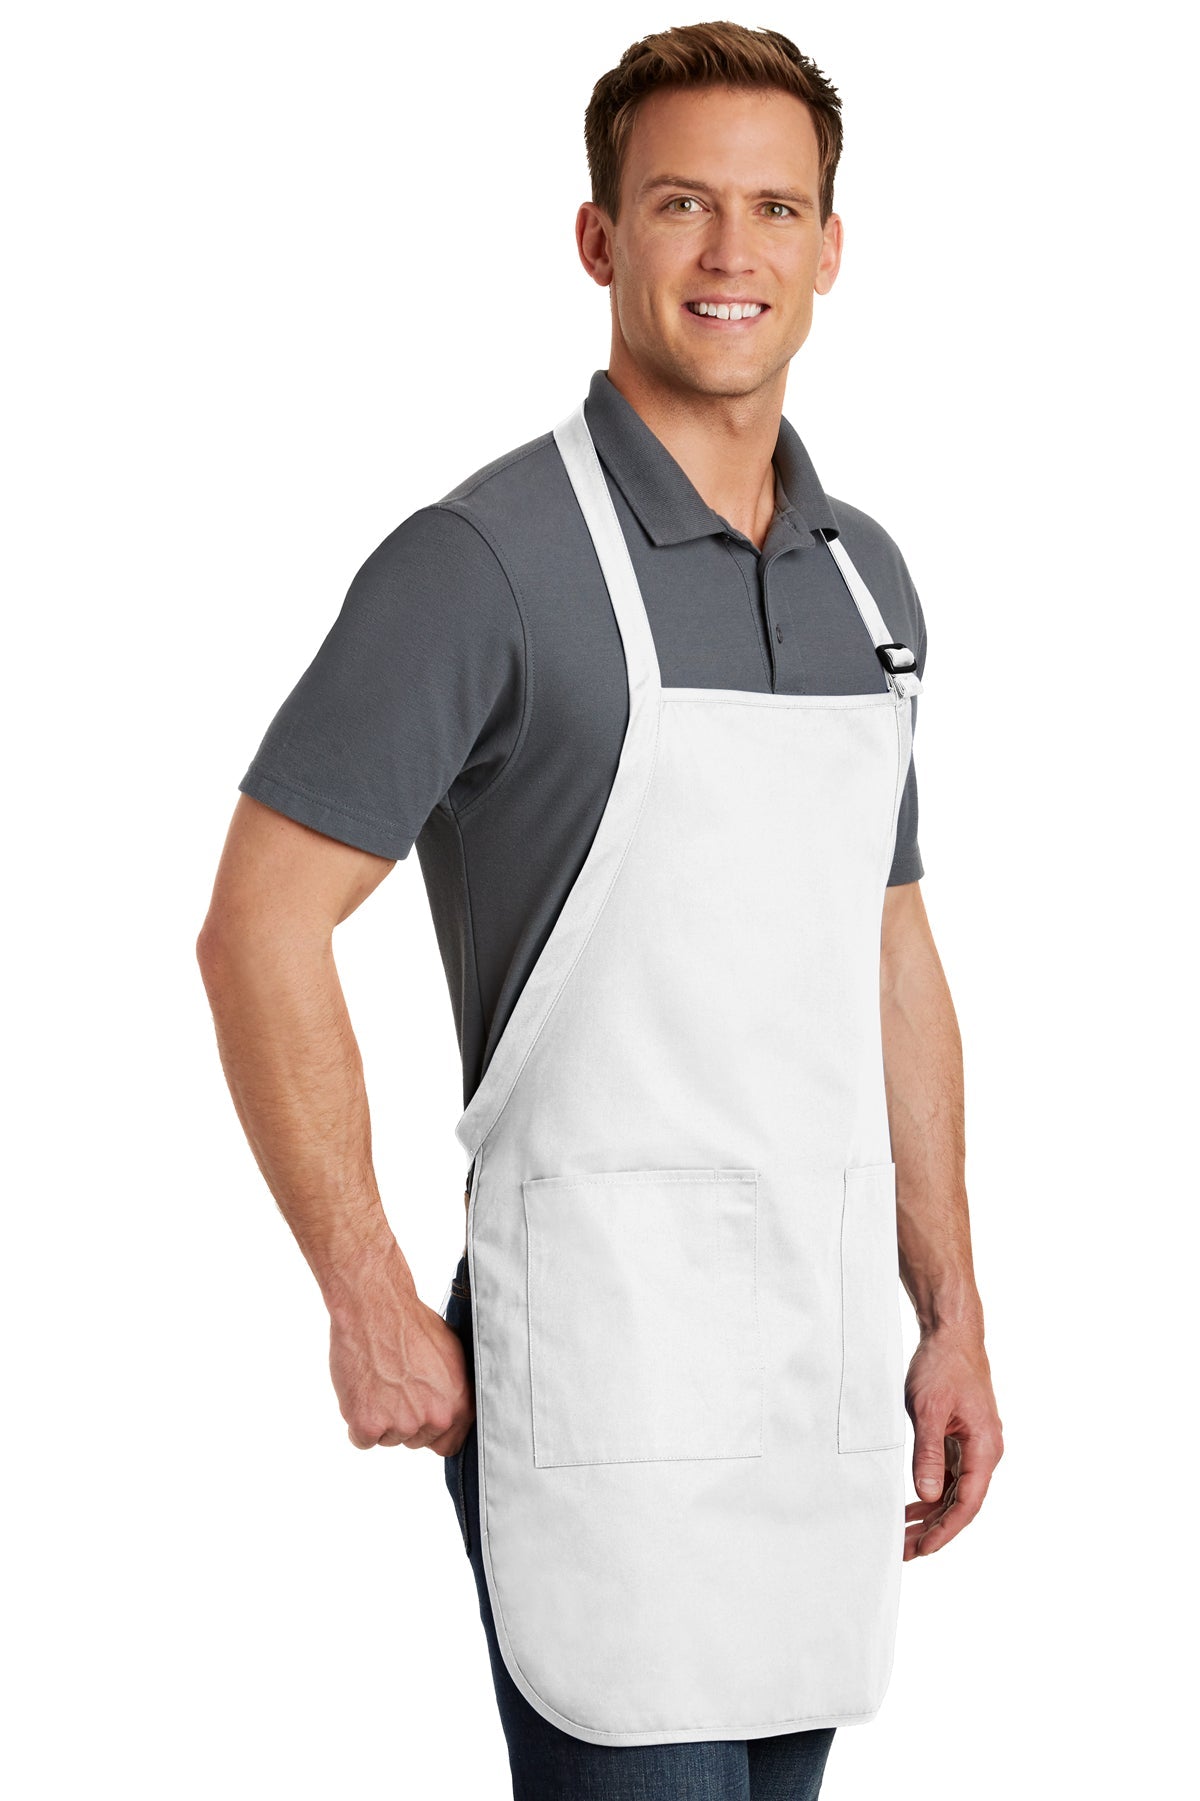 Port Authority Full-Length Custom Aprons with Pockets, White